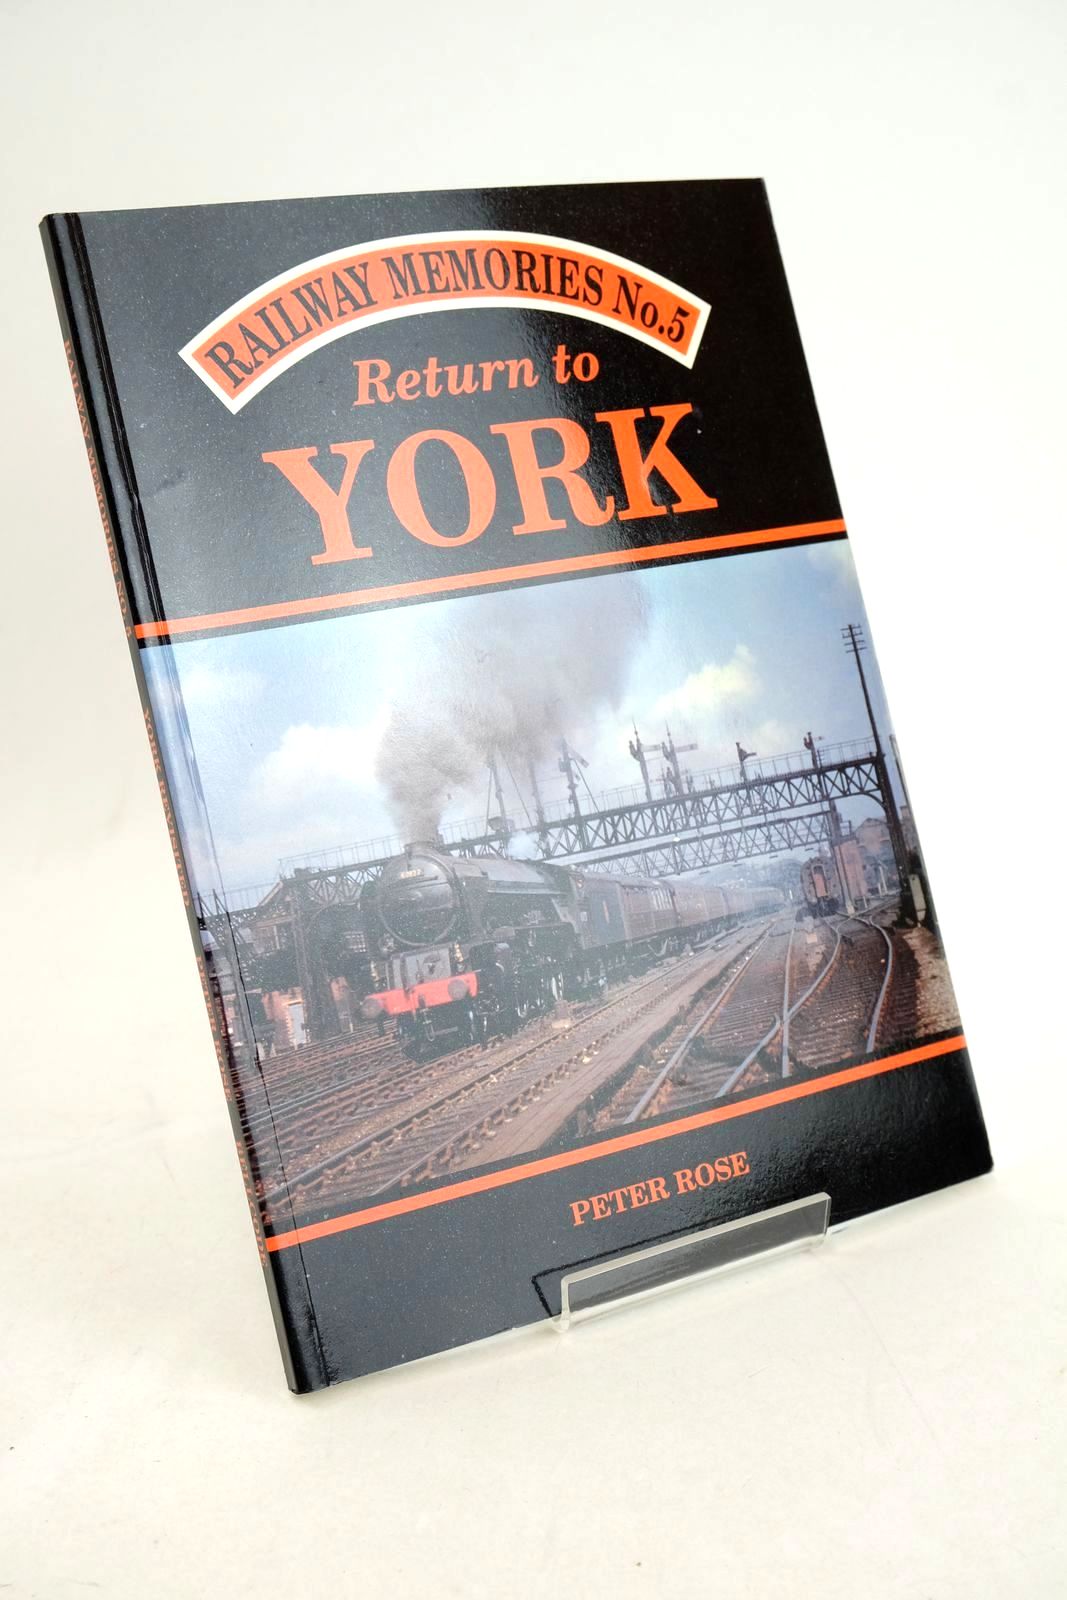 Photo of RAILWAY MEMORIES No. 5 RETURN TO YORK written by Rose, Peter published by Bellcode Books (STOCK CODE: 1327449)  for sale by Stella & Rose's Books